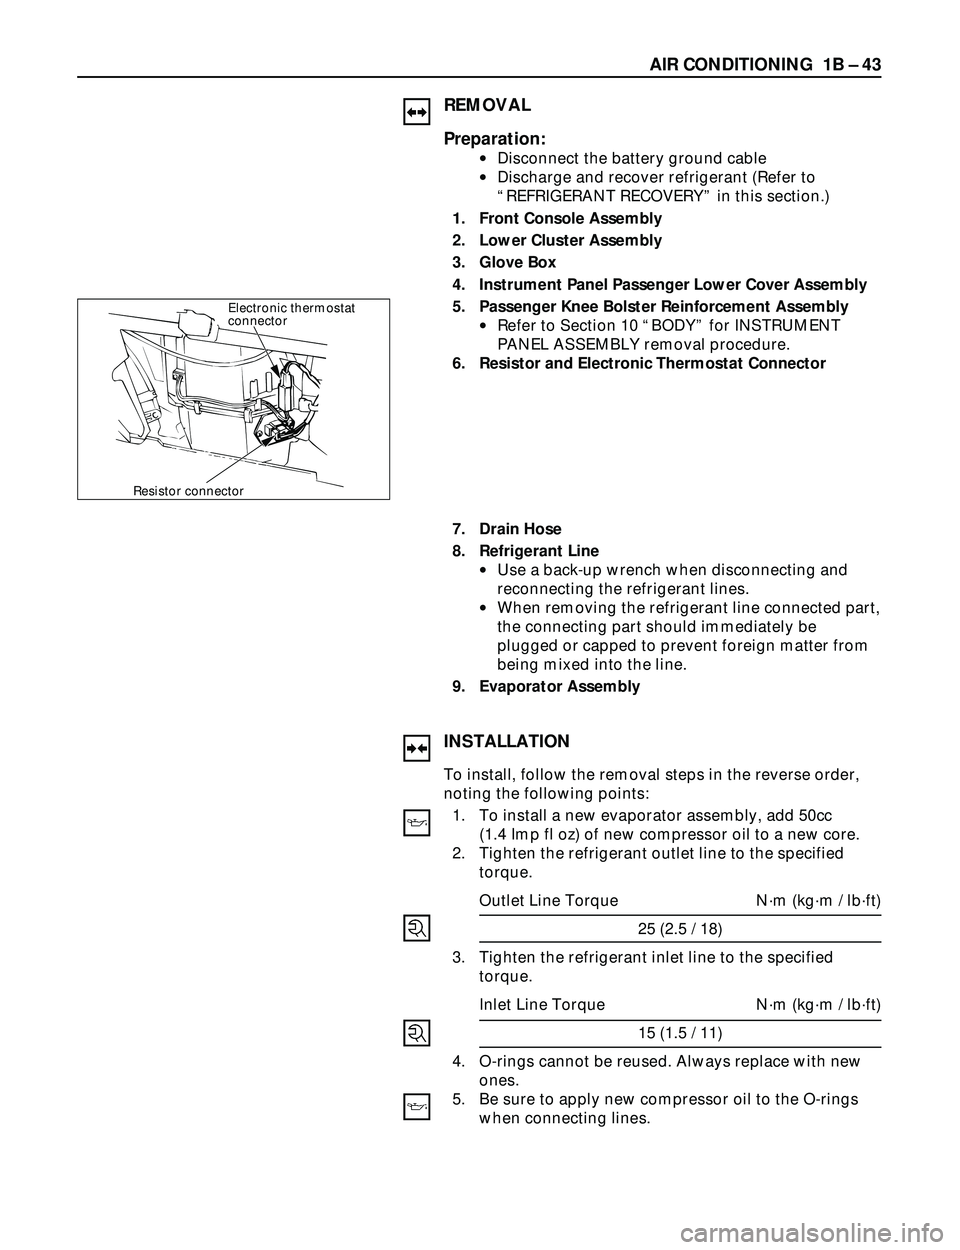 ISUZU TROOPER 1998  Service Repair Manual AIR CONDITIONING  1B Ð 43
REMOVAL
Preparation:
·Disconnect the battery ground cable
·Discharge and recover refrigerant (Refer to
ÒREFRIGERANT RECOVERYÓ in this section.) 
1. Front Console Assembl